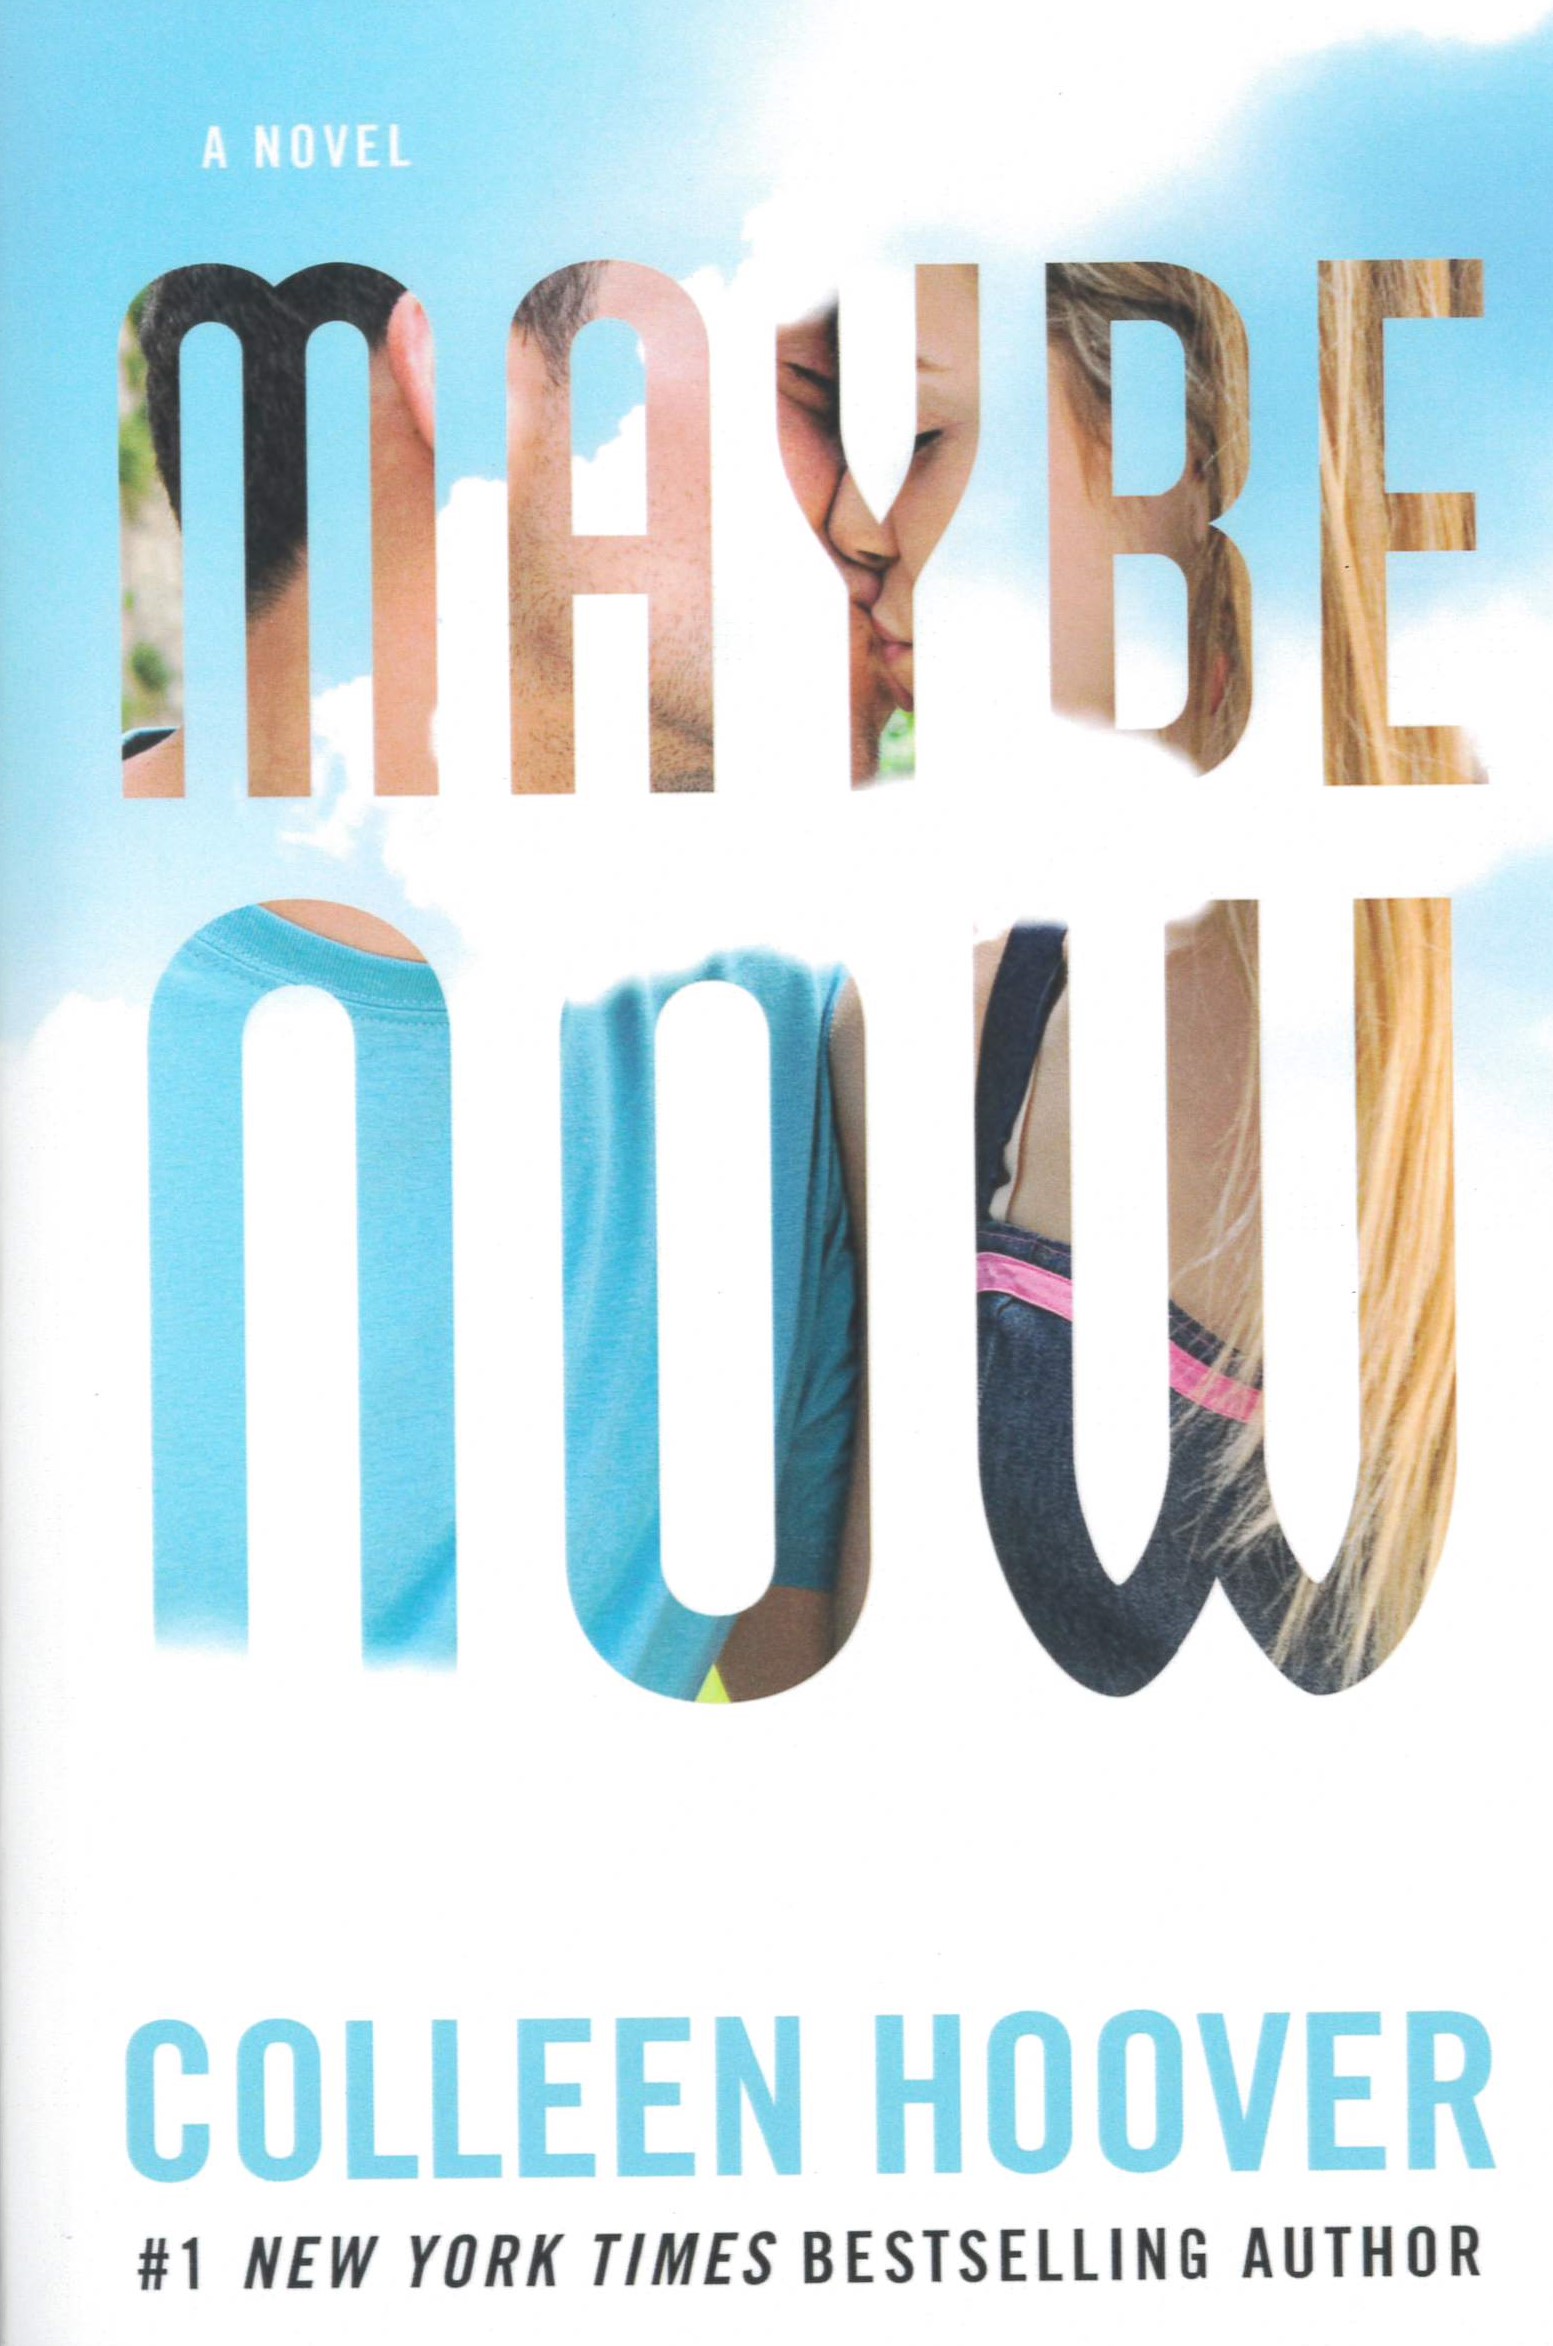 Maybe now : a novel /